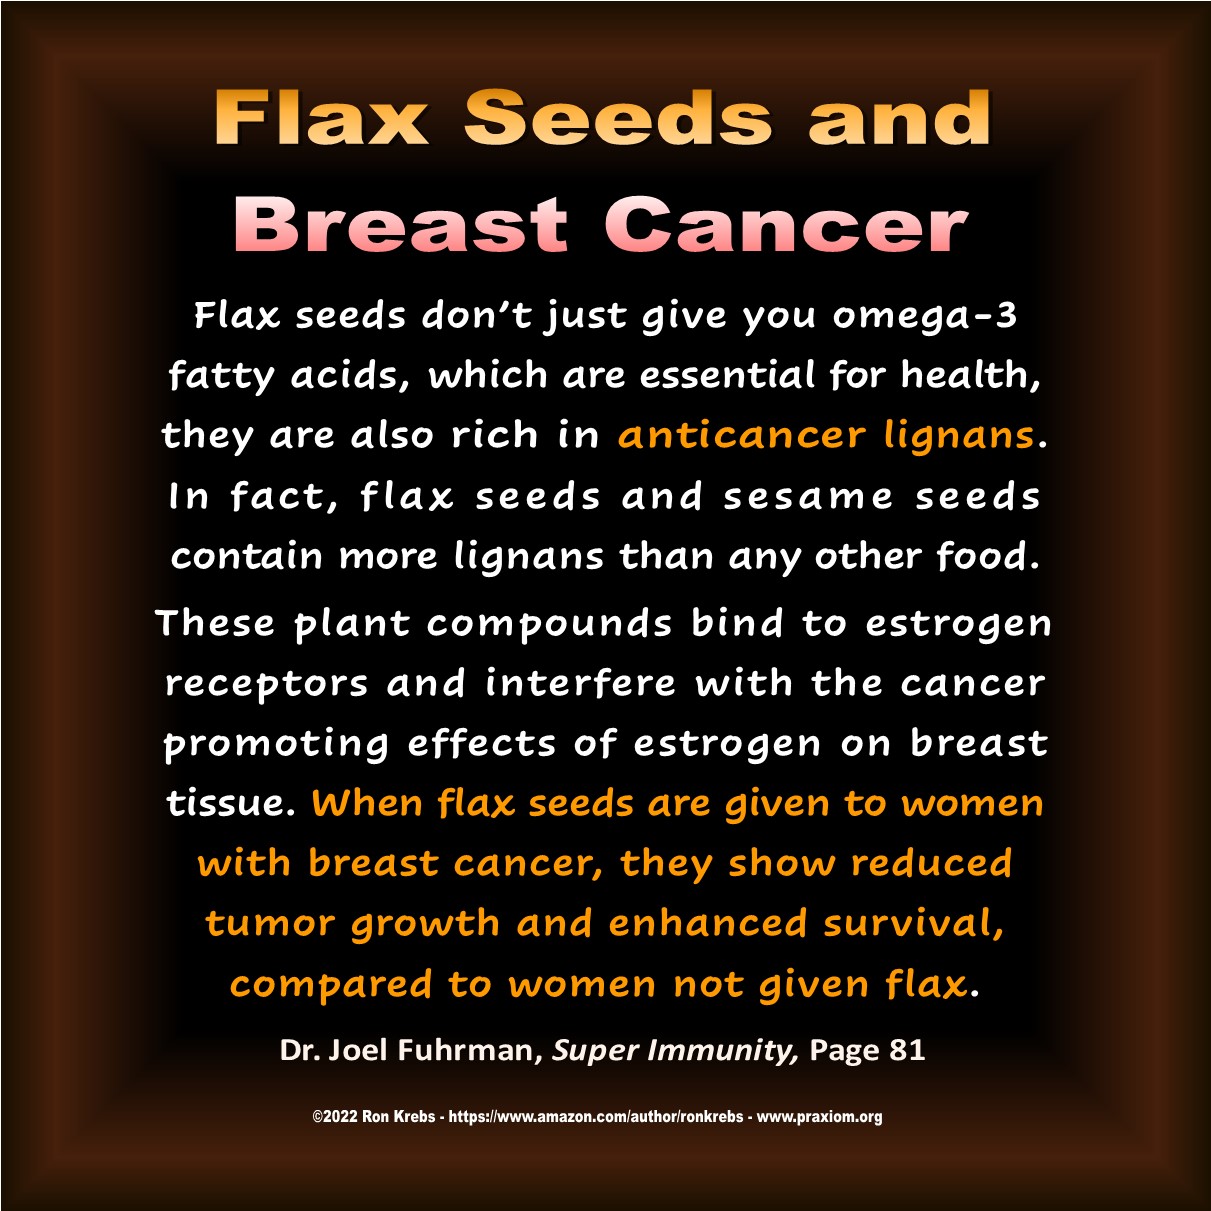 Flax Seeds and Breast Cancer - Dr. Joel Fuhrman